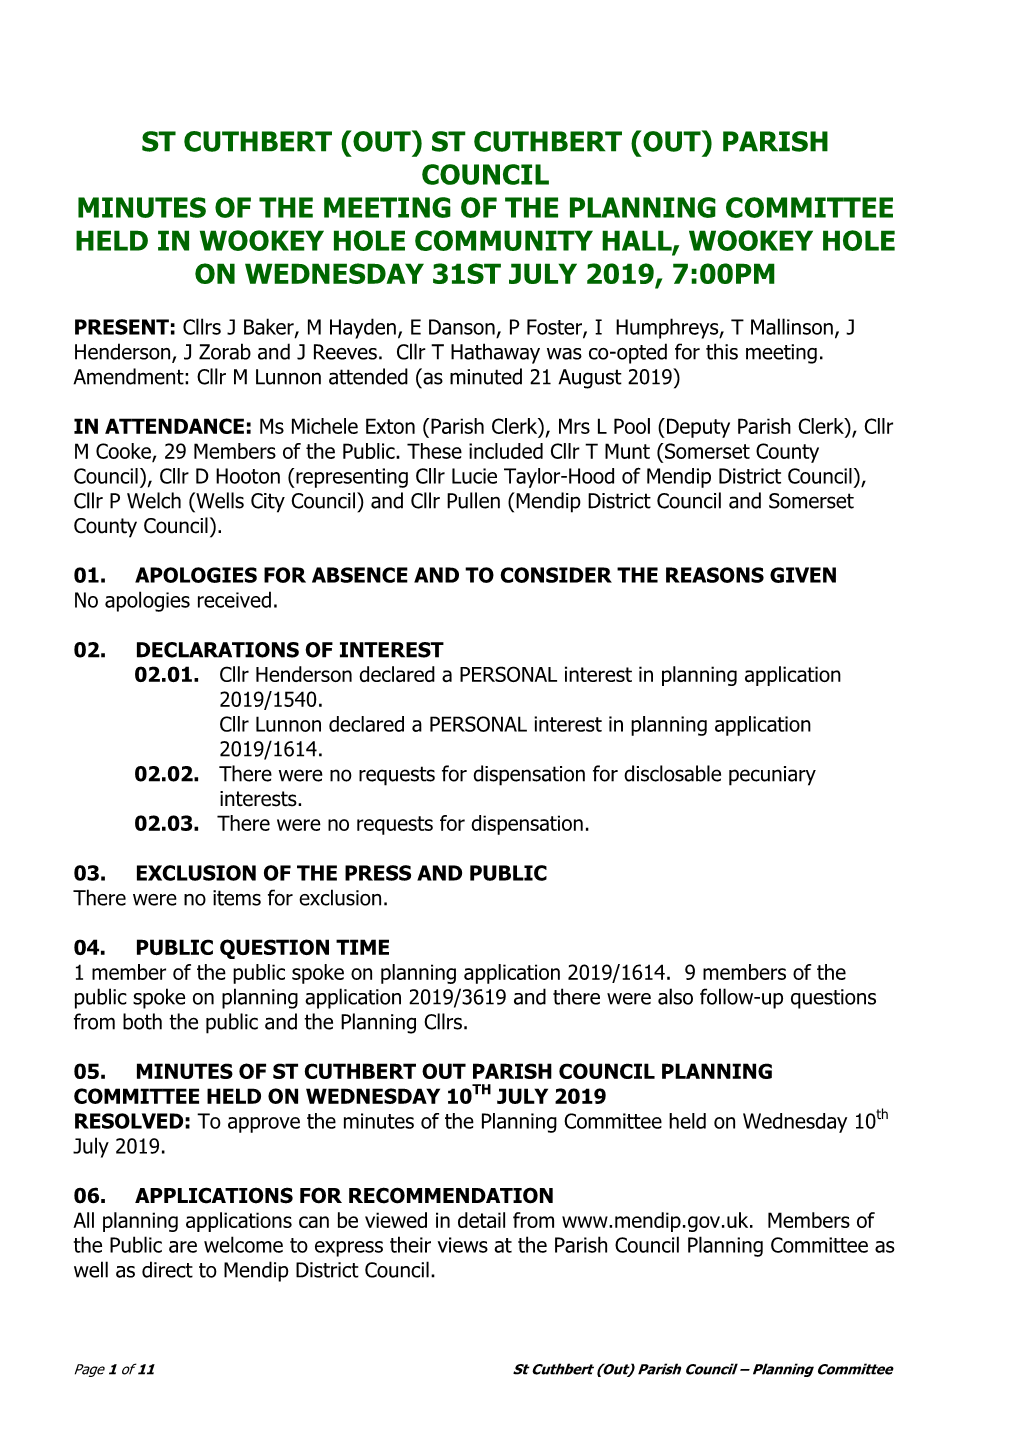 Parish Council Minutes of the Meeting of the Planning Committee Held in Wookey Hole Community Hall, Wookey Hole on Wednesday 31St July 2019, 7:00Pm